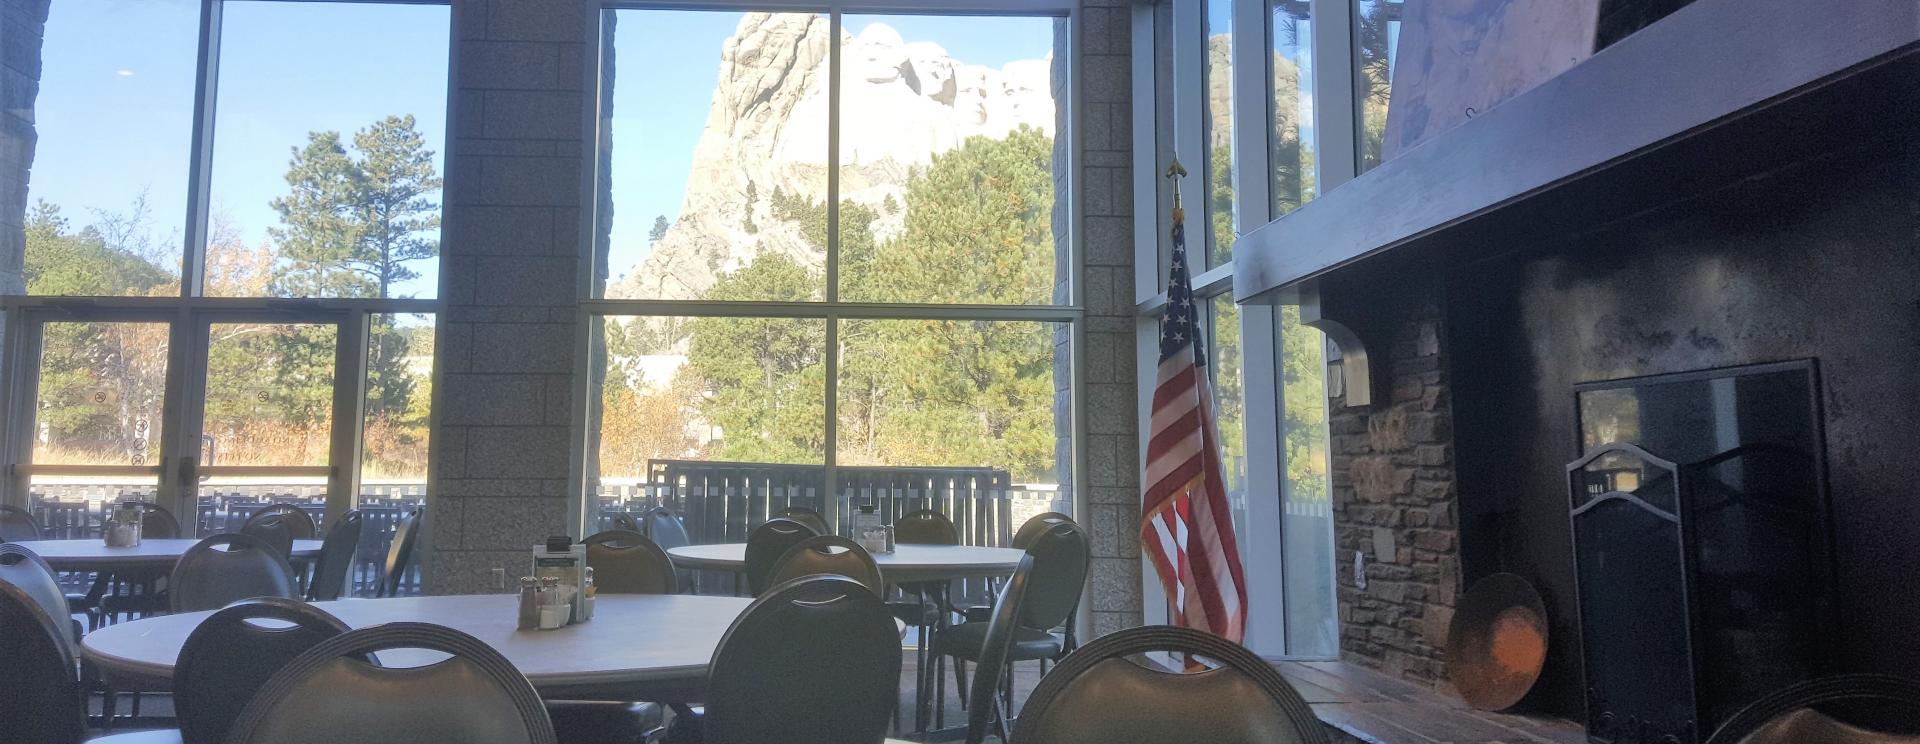 Mount Rushmore Concessions